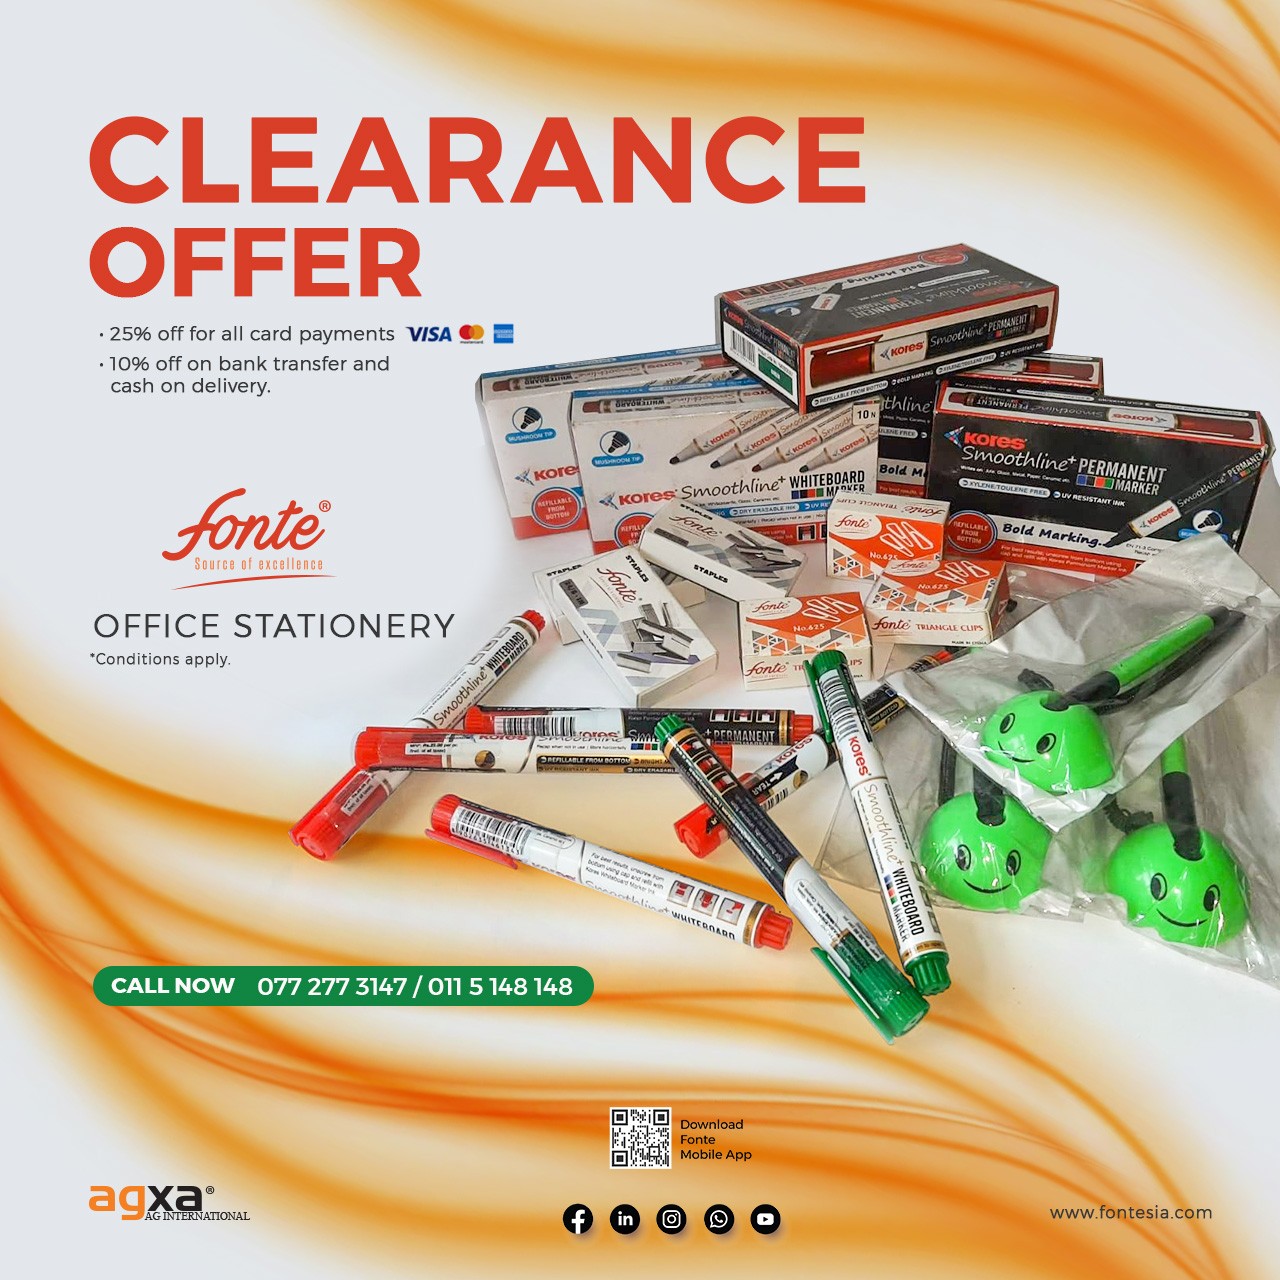 clearance-offer-image (1)